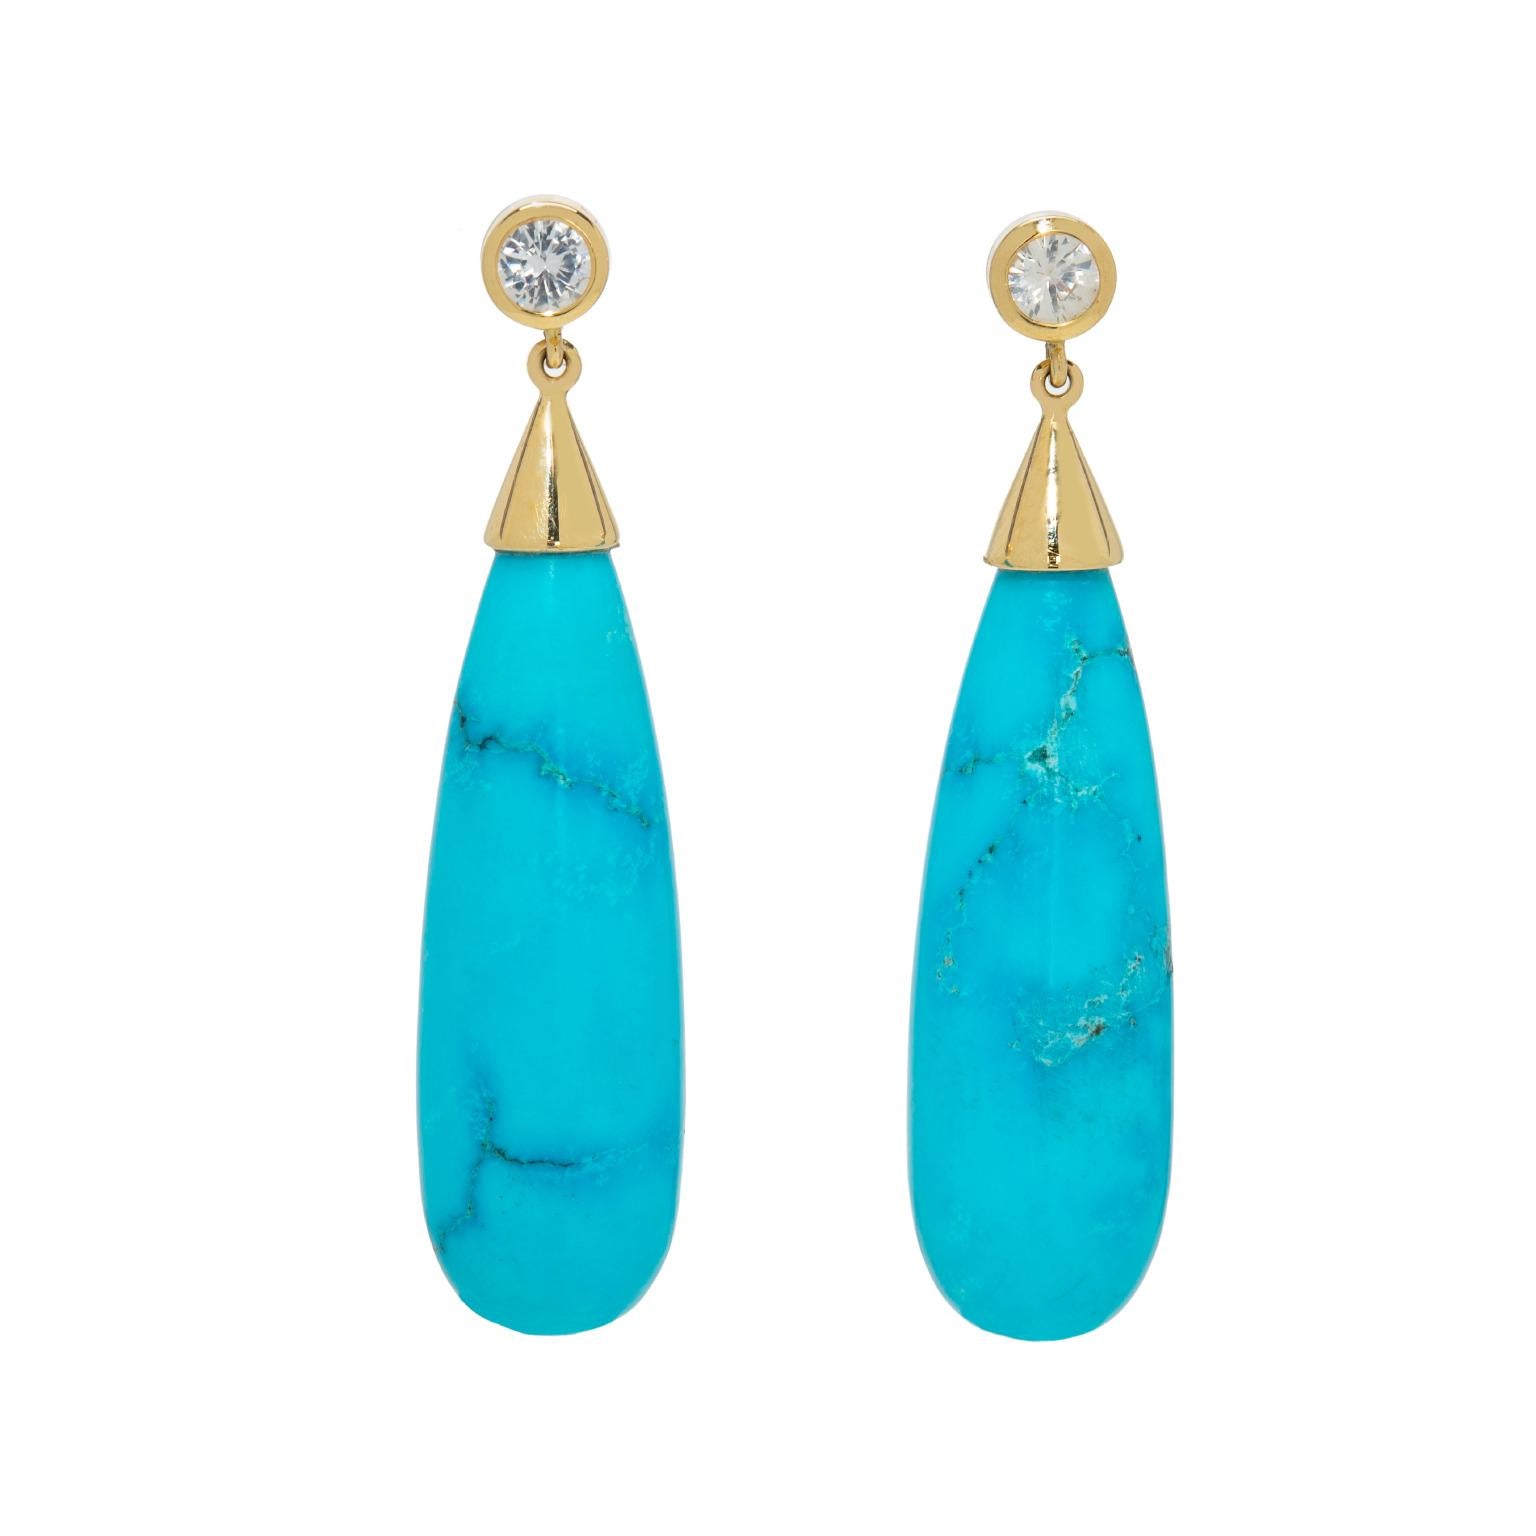 The stunning and vibrant blue of these drop turquoise stones will take your breath away. Nestled in 18k yellow gold, these magnificent earrings are topped only by the white round sapphires that sit directly on the ear lobe for a full sparkling